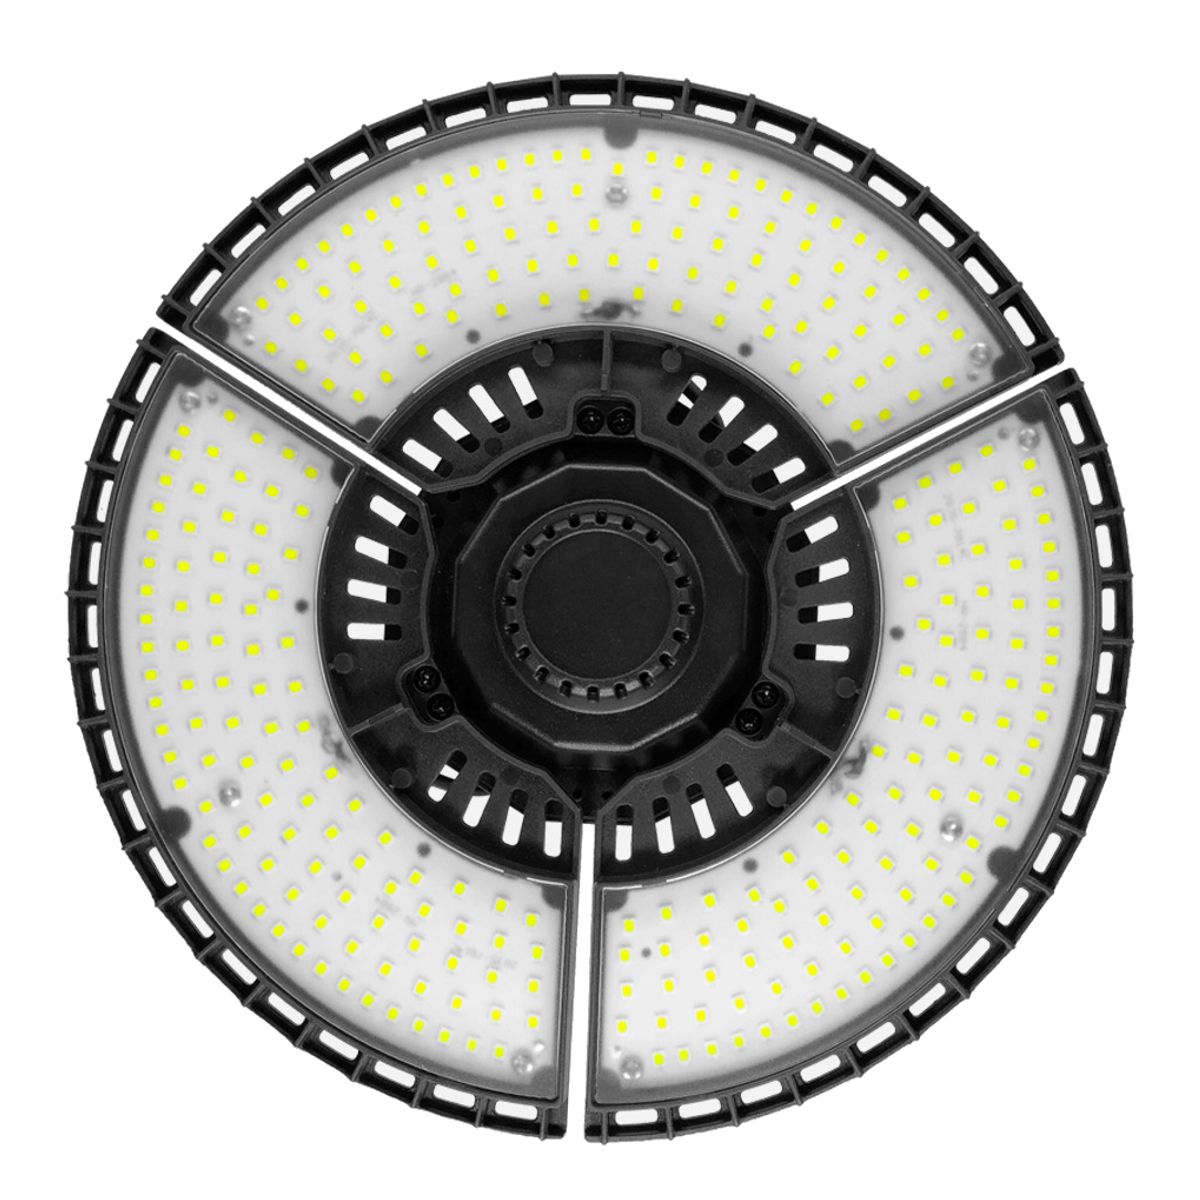 60W-80W-E27-LED-Garage-Light-Bulb-Ceiling-Fixture-Shop-Workshop-Deformable-Lamp-with-Remote-Control-1744890